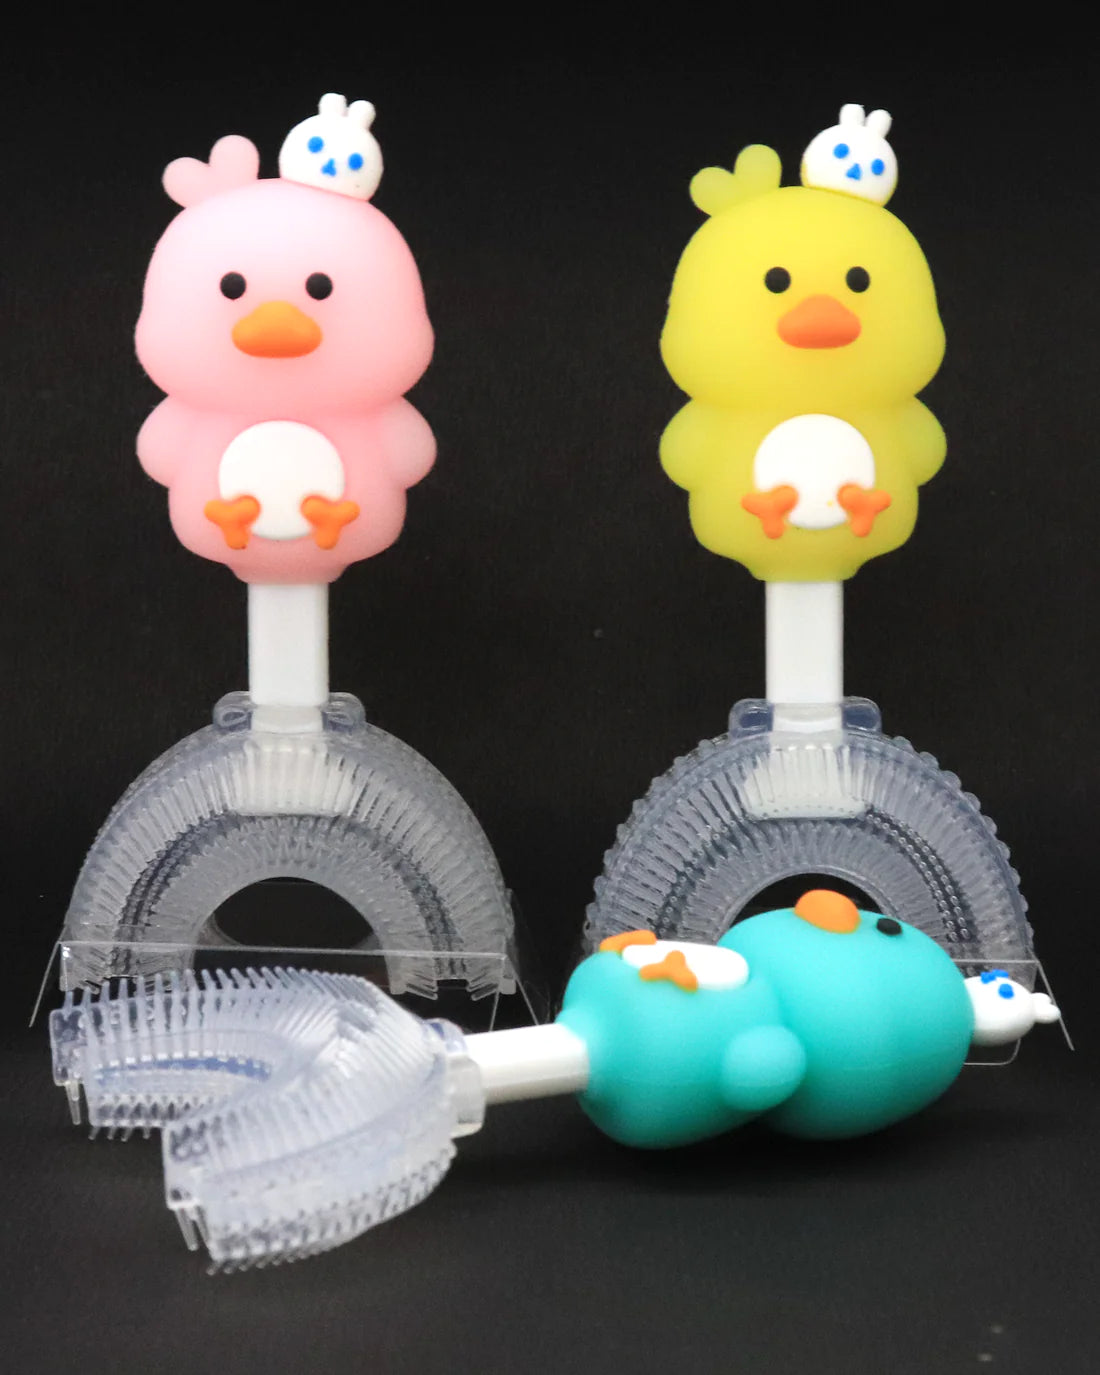 DuckyBrush: Safe & Fun 3D Duck U-Shaped Silicone Toothbrush for Infants(Outer Box Damage)